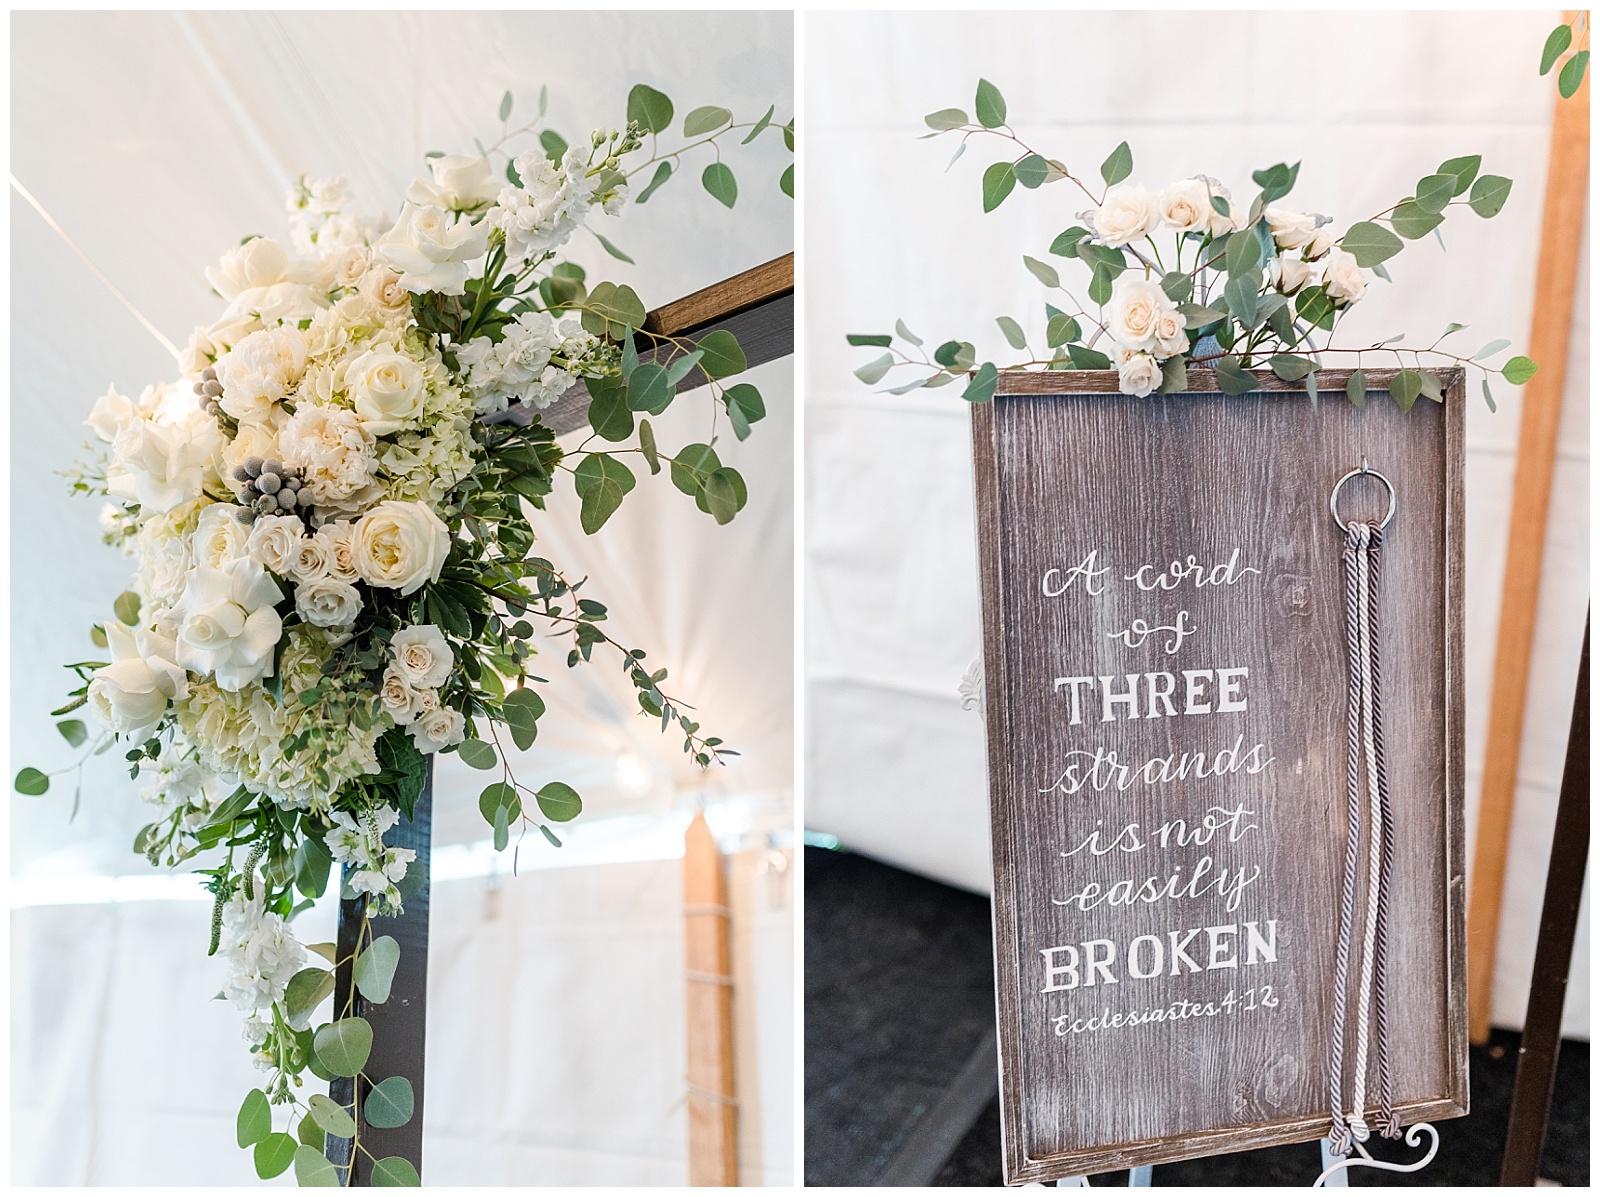 white roses and greenery decorate wedding signage and altar at intimate home wedding in westchester pa